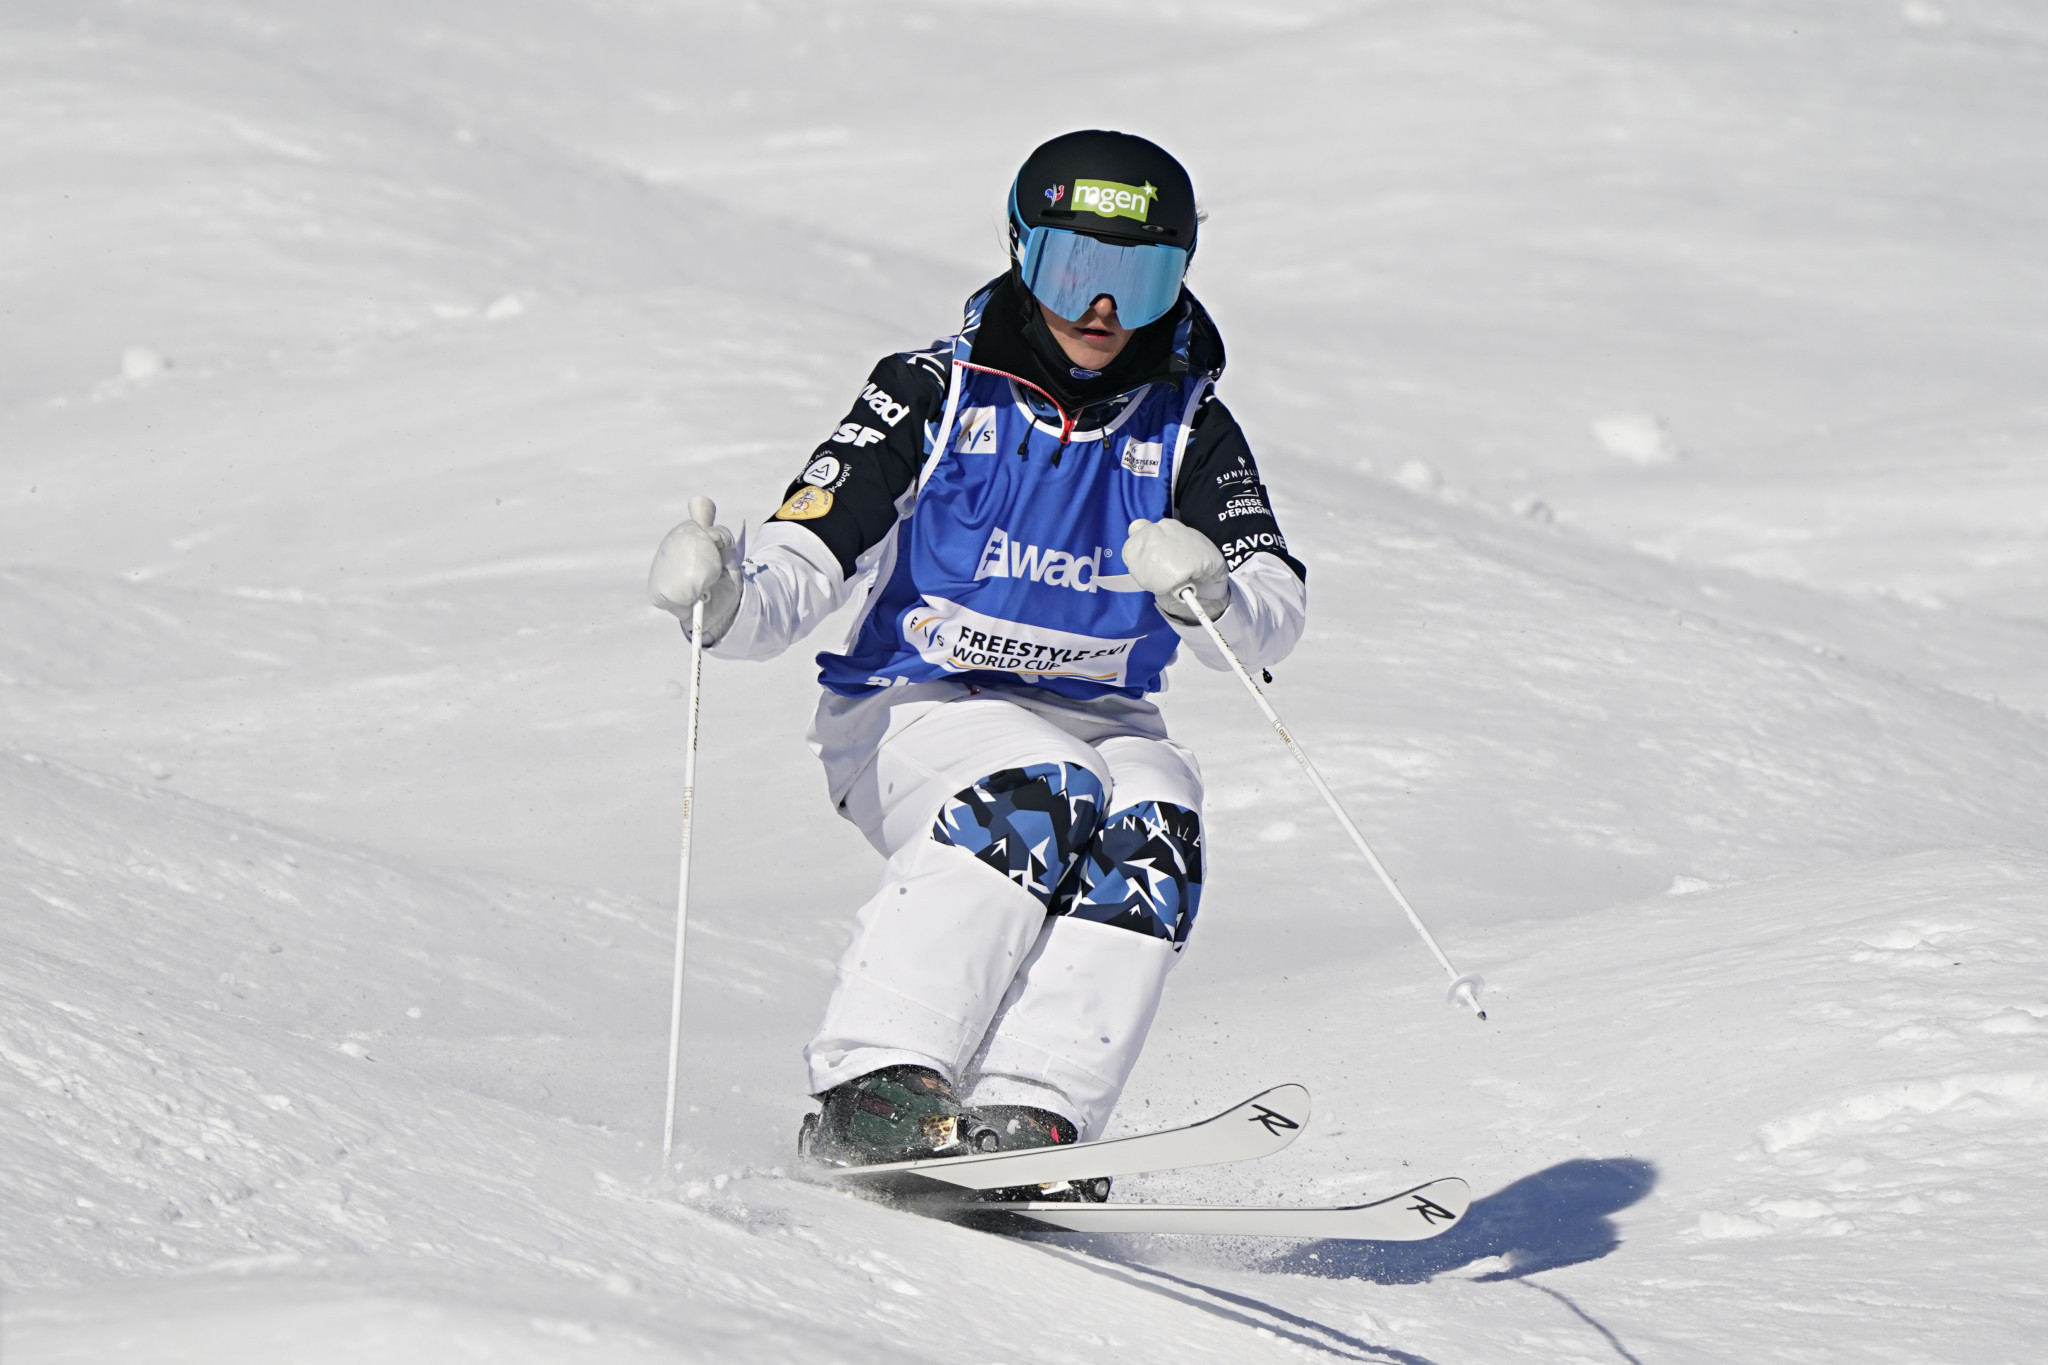 Perrine Laffont is tied with Kari Traa and Jenn Heil for the most moguls world titles ©Getty Images